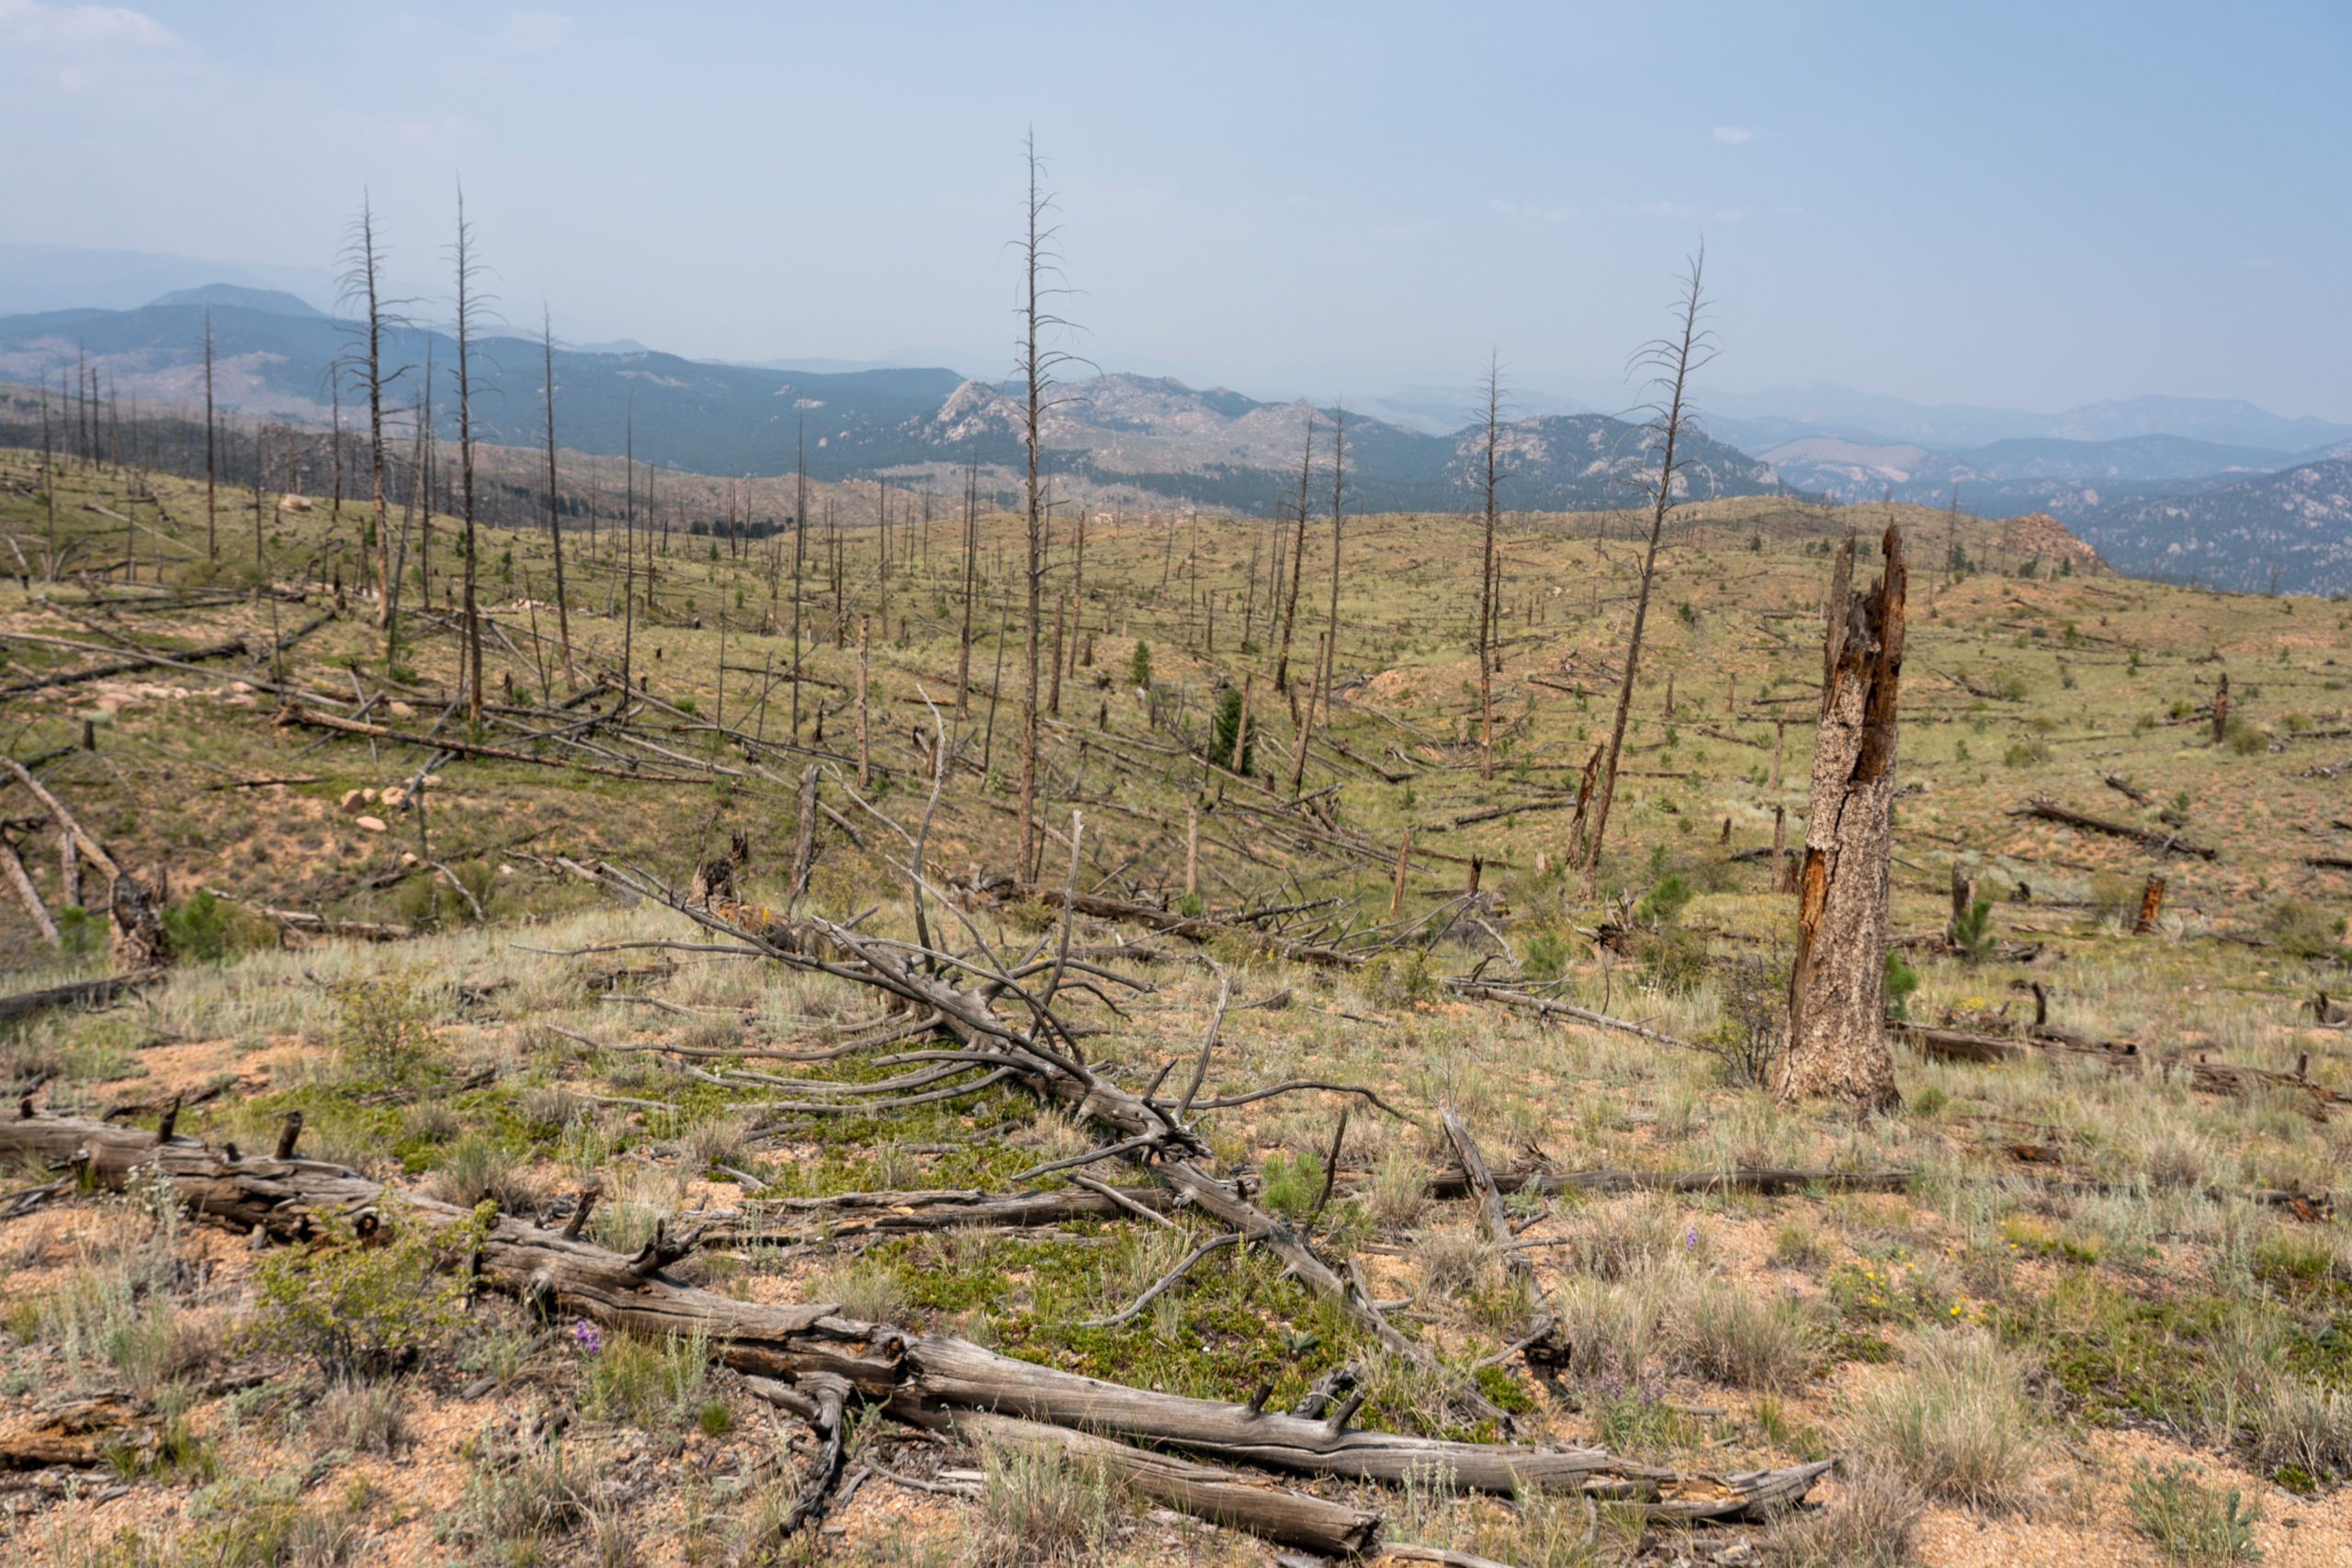 The Buffalo Creek Fire in 1996 destroyed 12,000 acres in the Denver Water's South Platte River watershed. Photo credit: Denver Water.